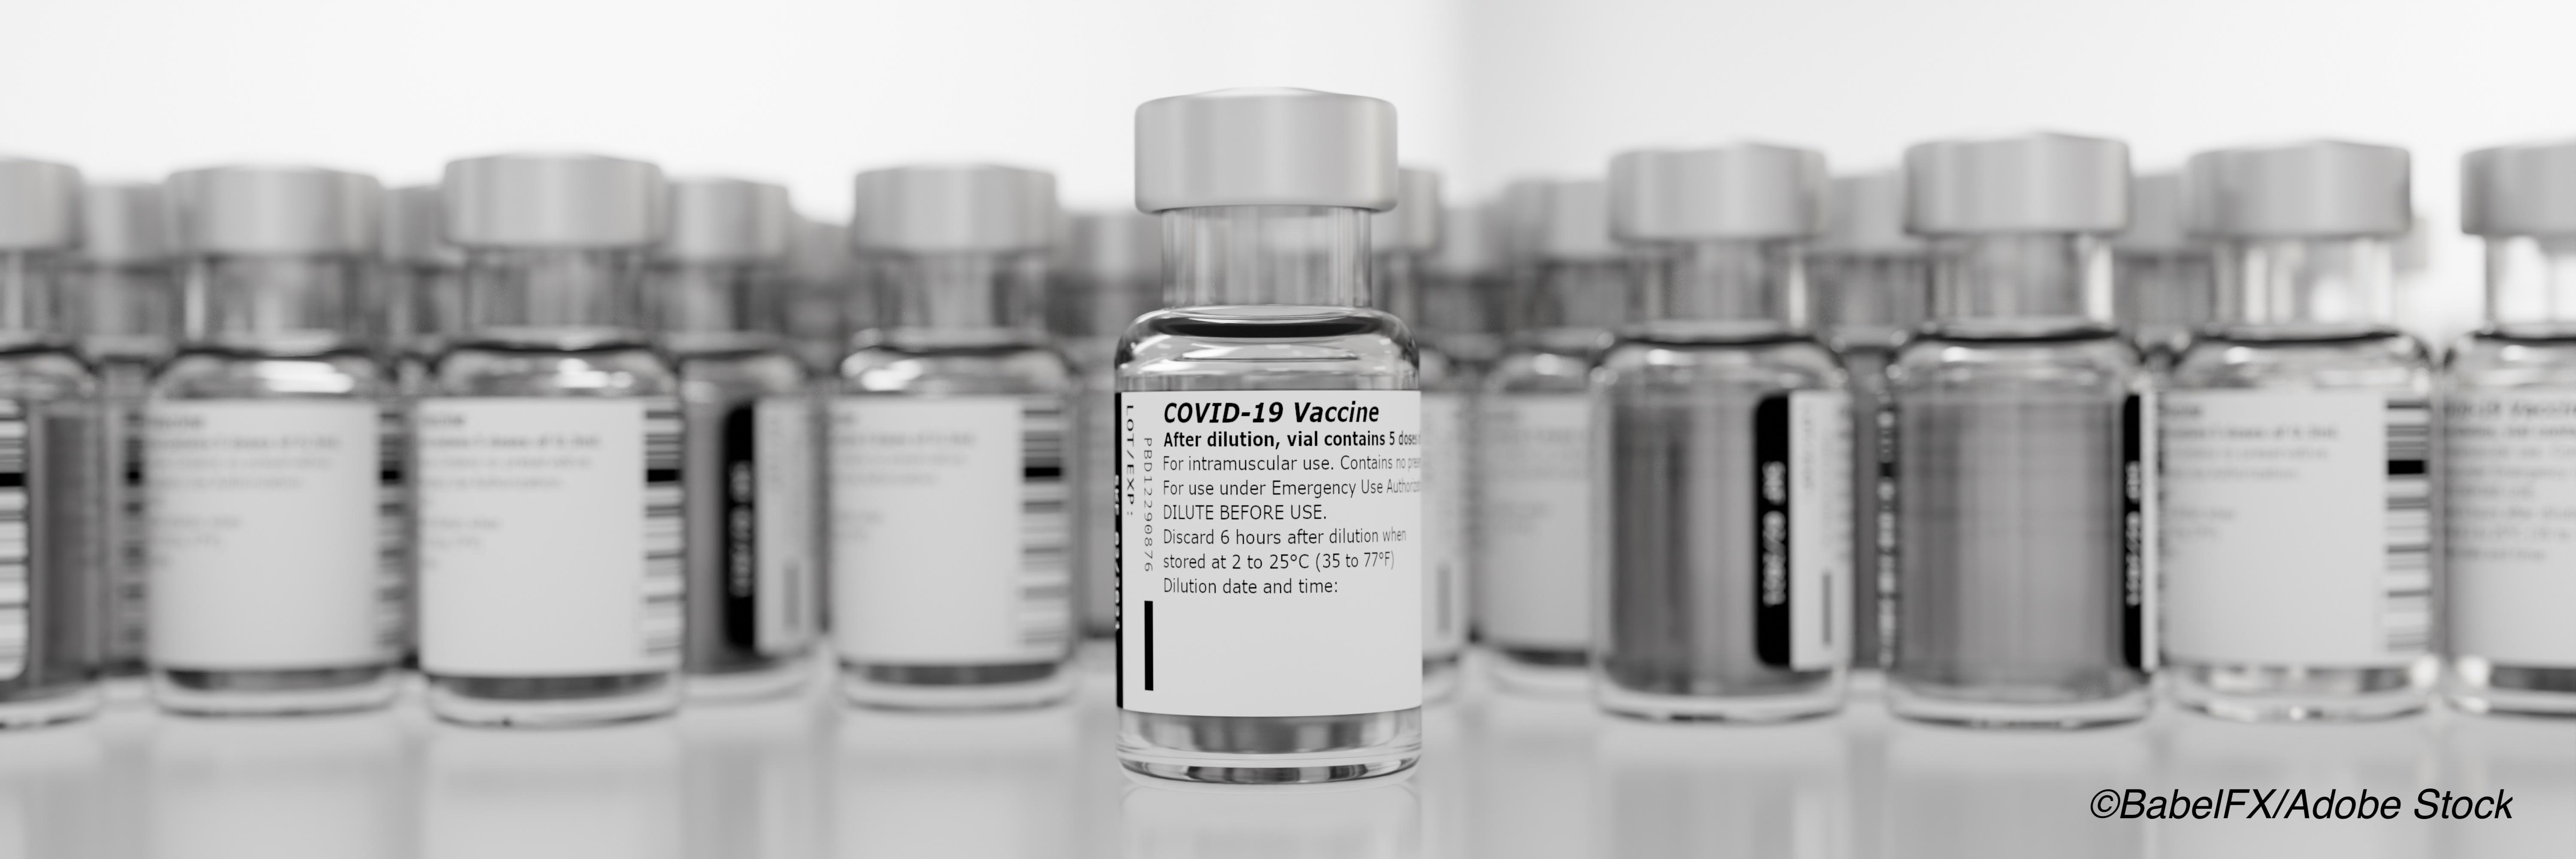 Two Doses of Covid-19 Vaccines Highly Effective Against Delta Variant